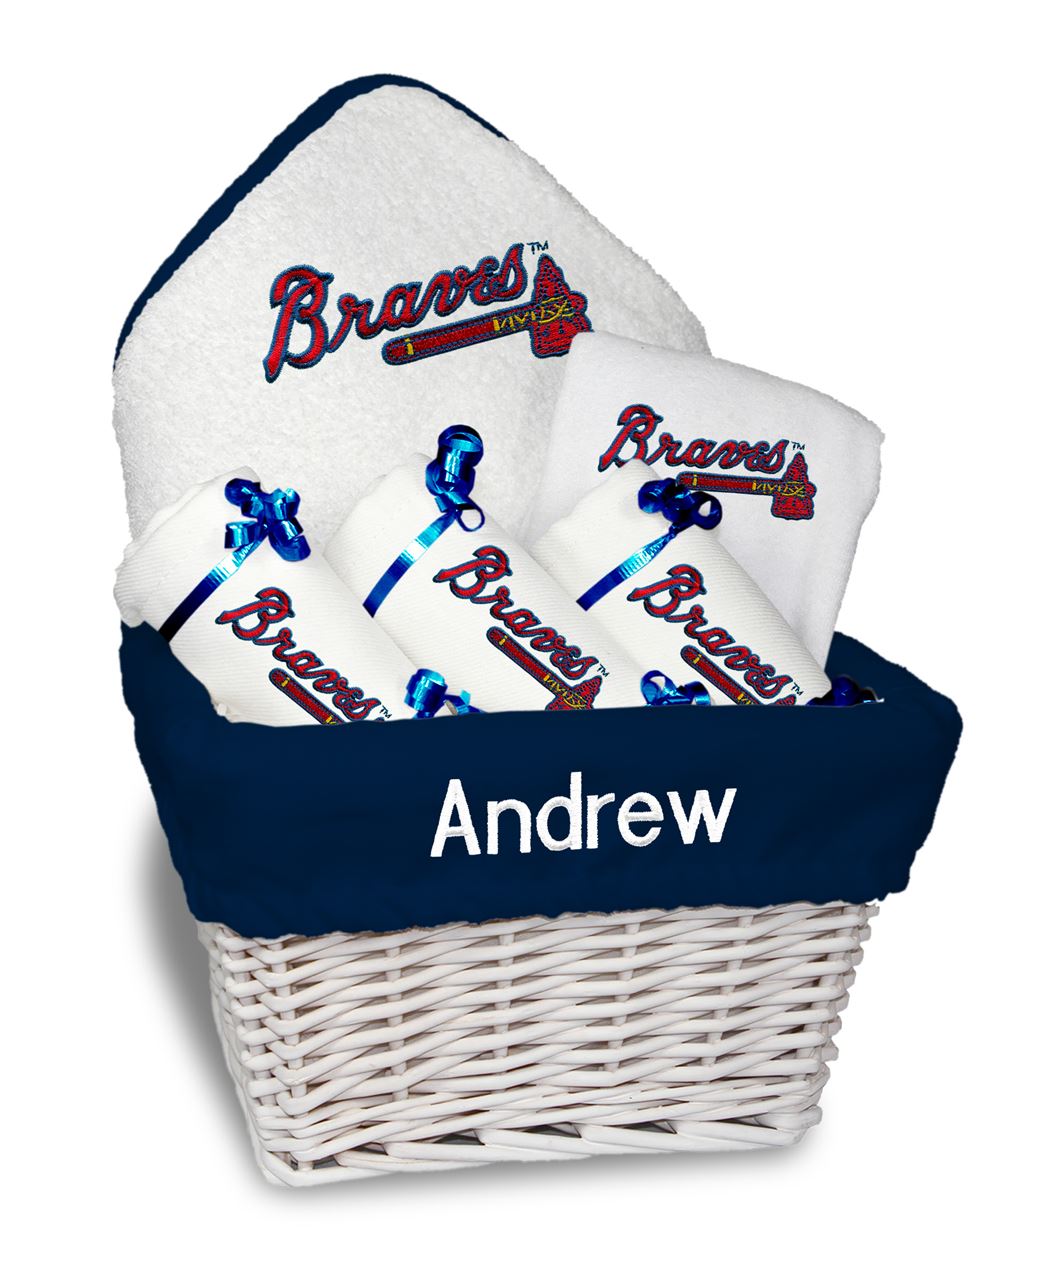 Chad and Jake ATL Braves Personalized 6-Piece Gift Basket